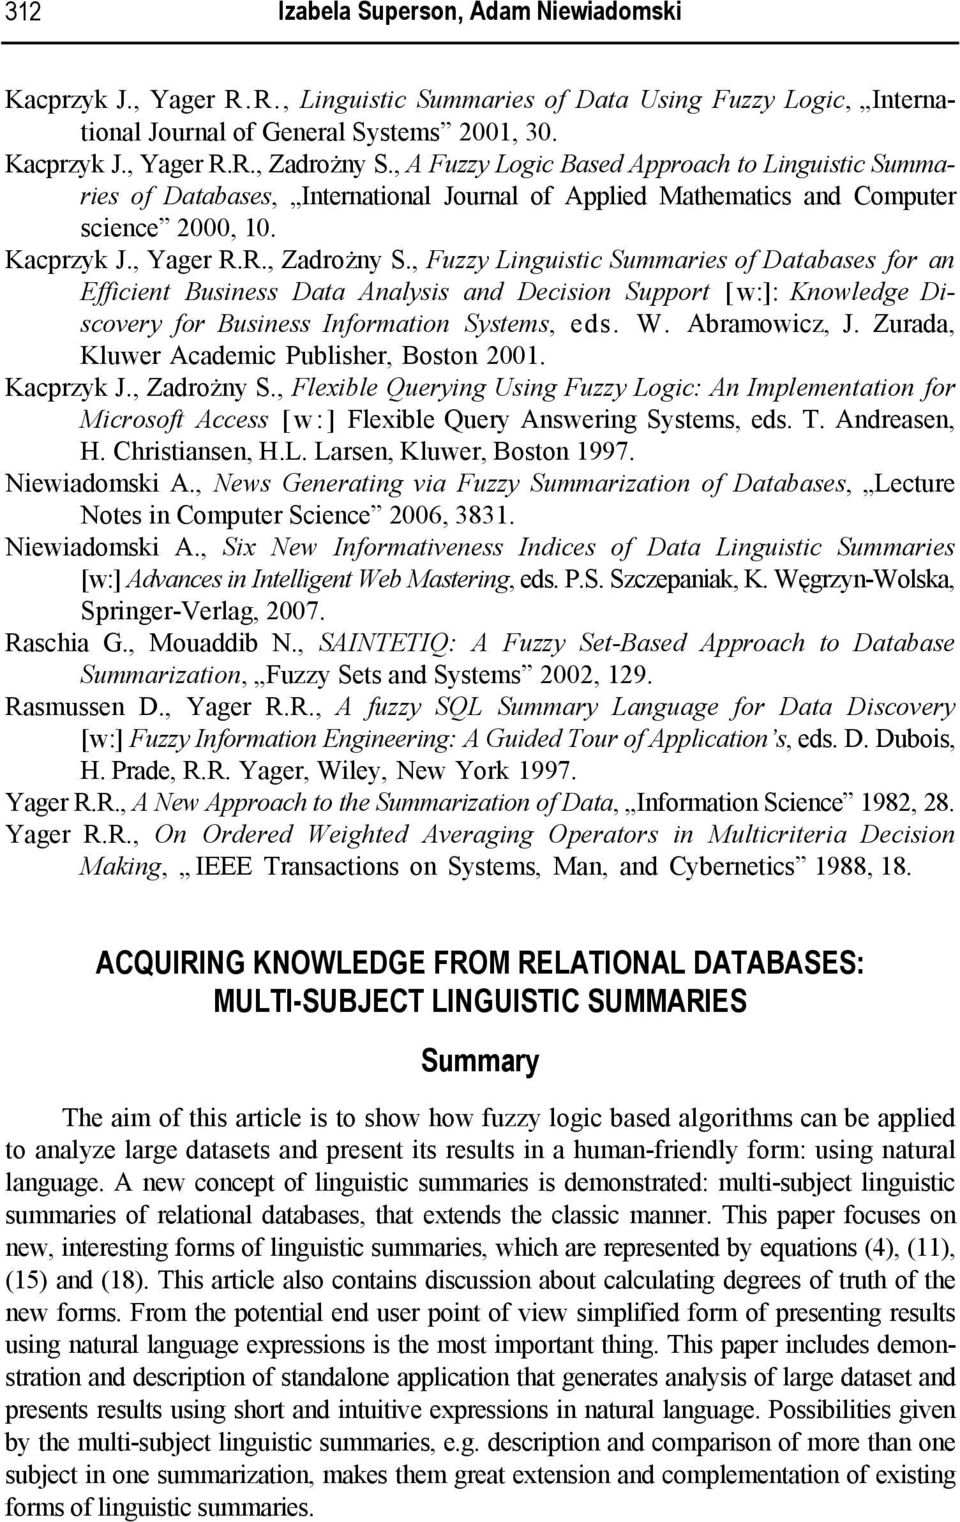 Fuzzy Linguistic Summaries of Databases for an Efficient Business Data Analysis and Decision Support [w:]: Knowledge Discovery for Business Information Systems eds. W. Abramowicz J.